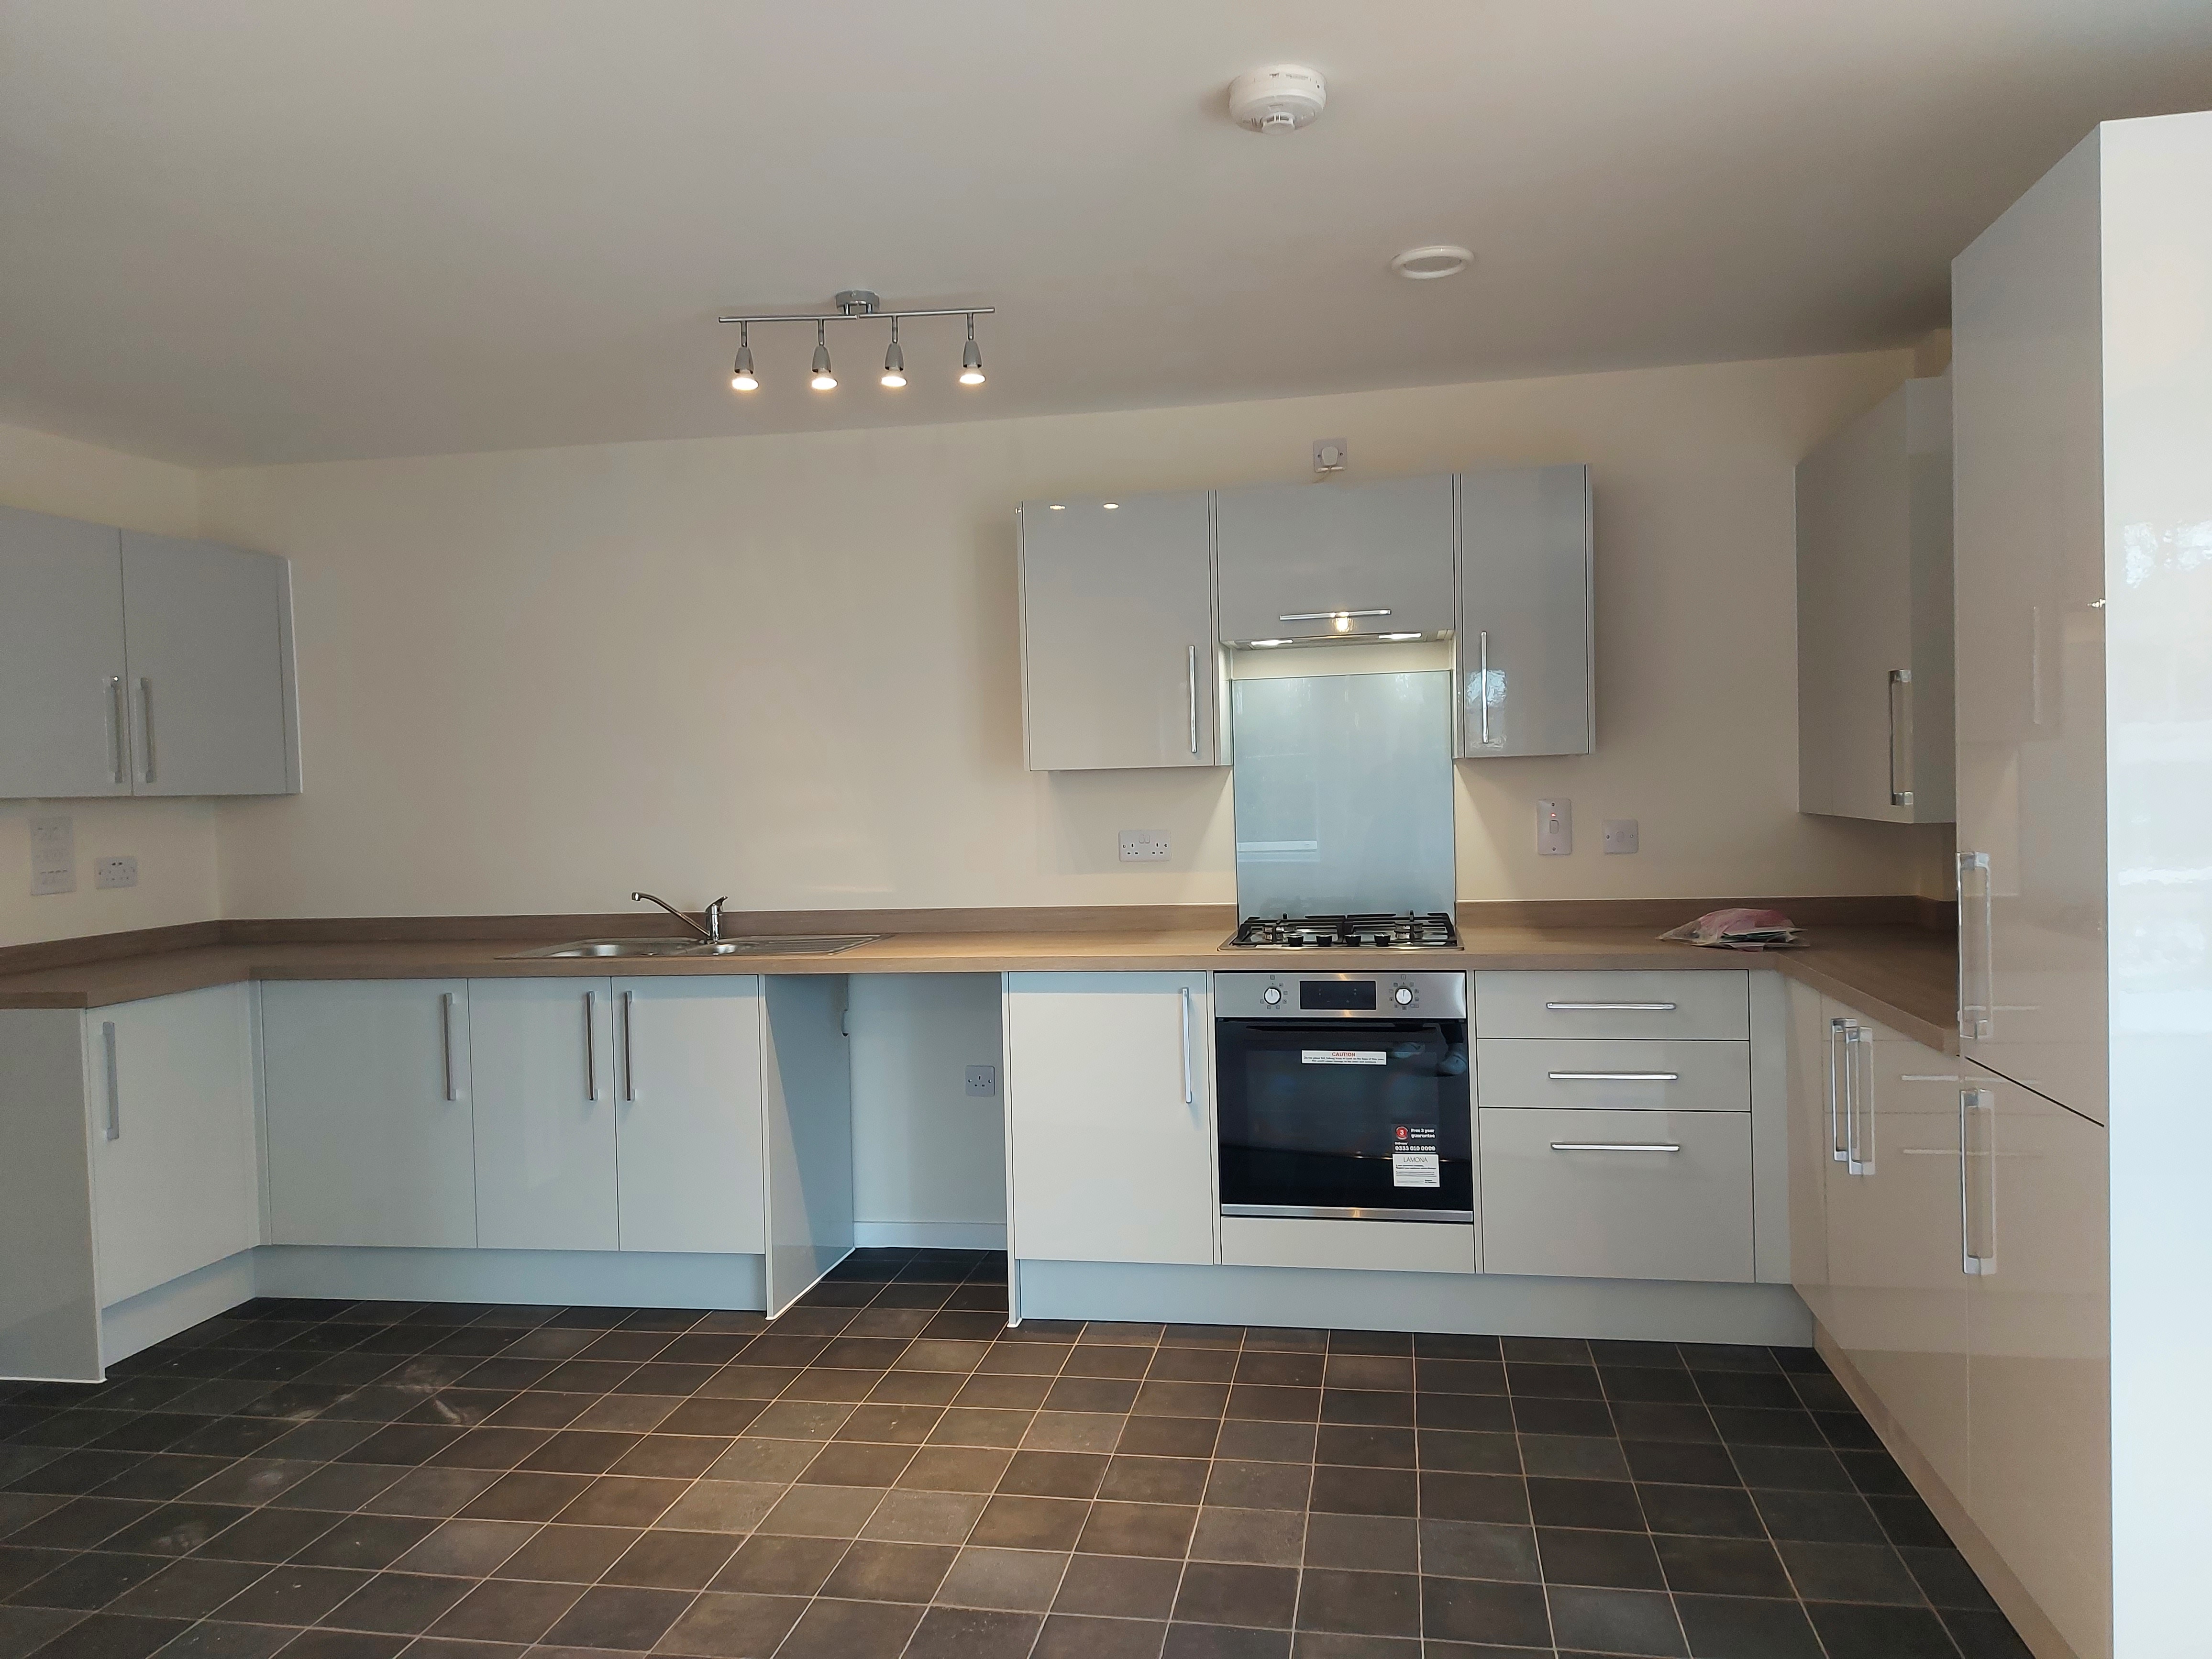 Photo of a Kitchen at a Shared Ownership property at Windmill Place in Ash